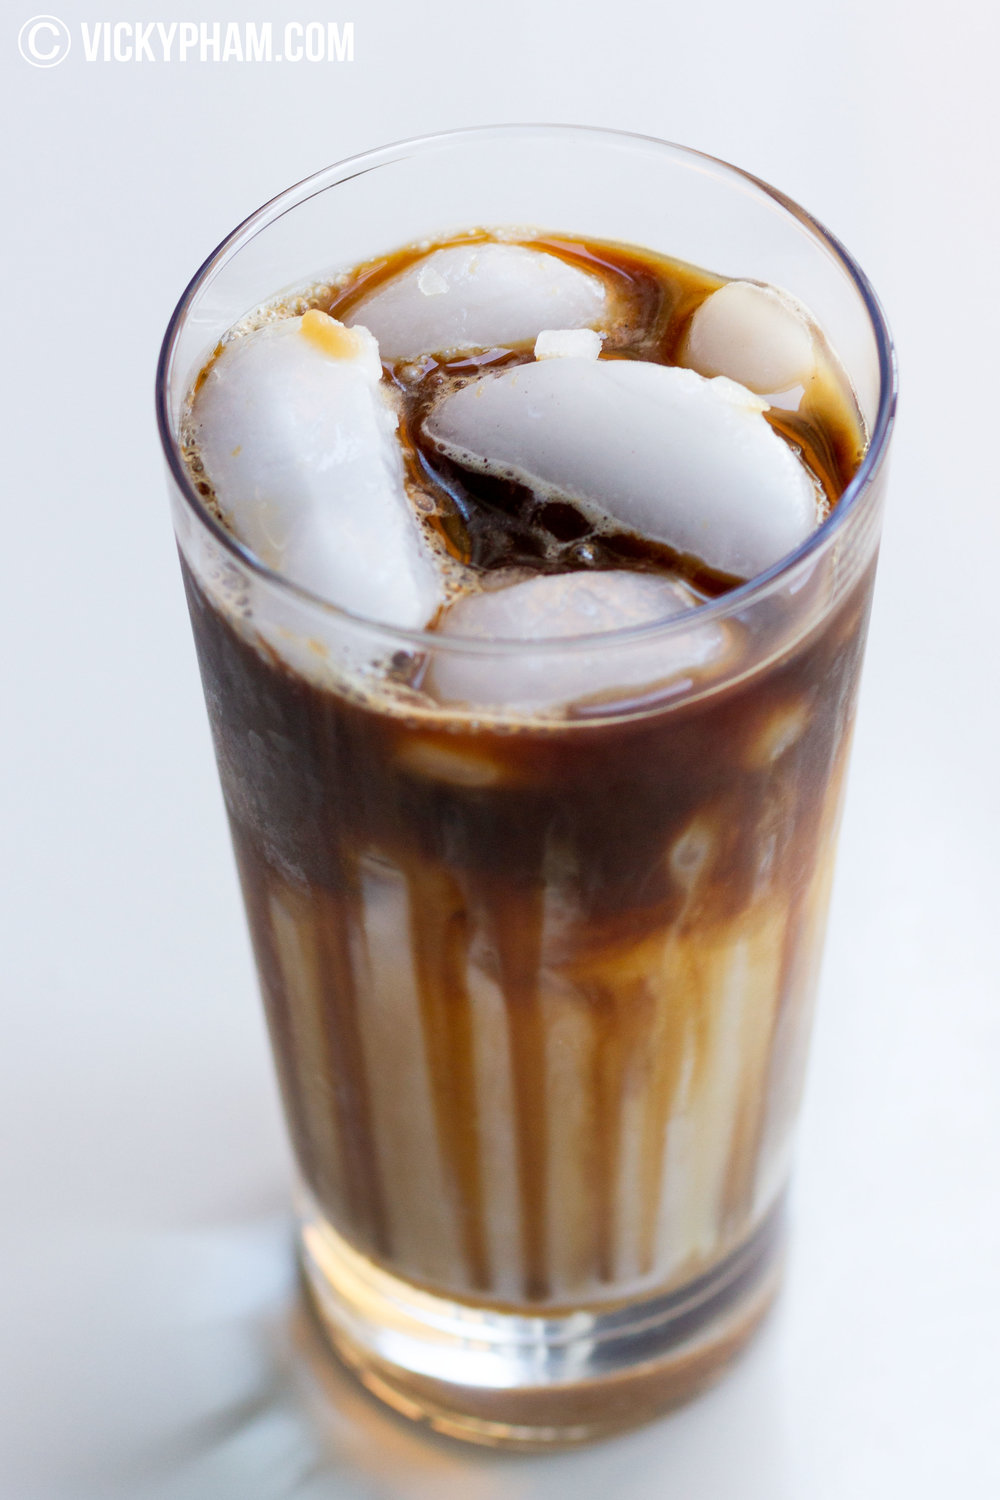 Iced Caramel Macchiato Vicky Pham Vietnamese Home Cooking Recipes,Jamaican Beef Patty Png